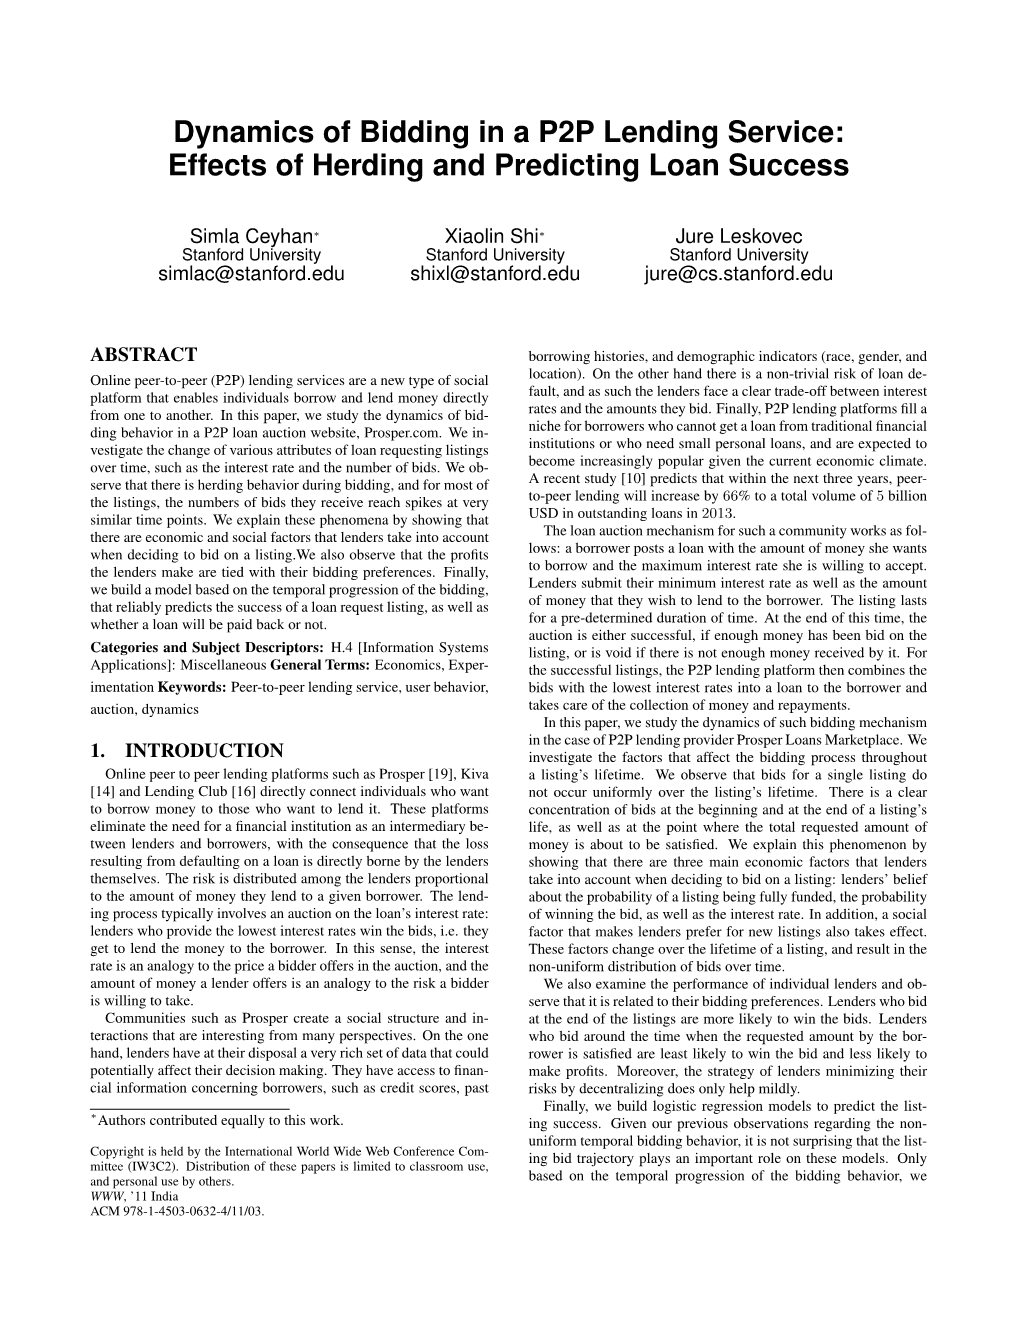 Dynamics of Bidding in a P2P Lending Service: Effects of Herding and Predicting Loan Success